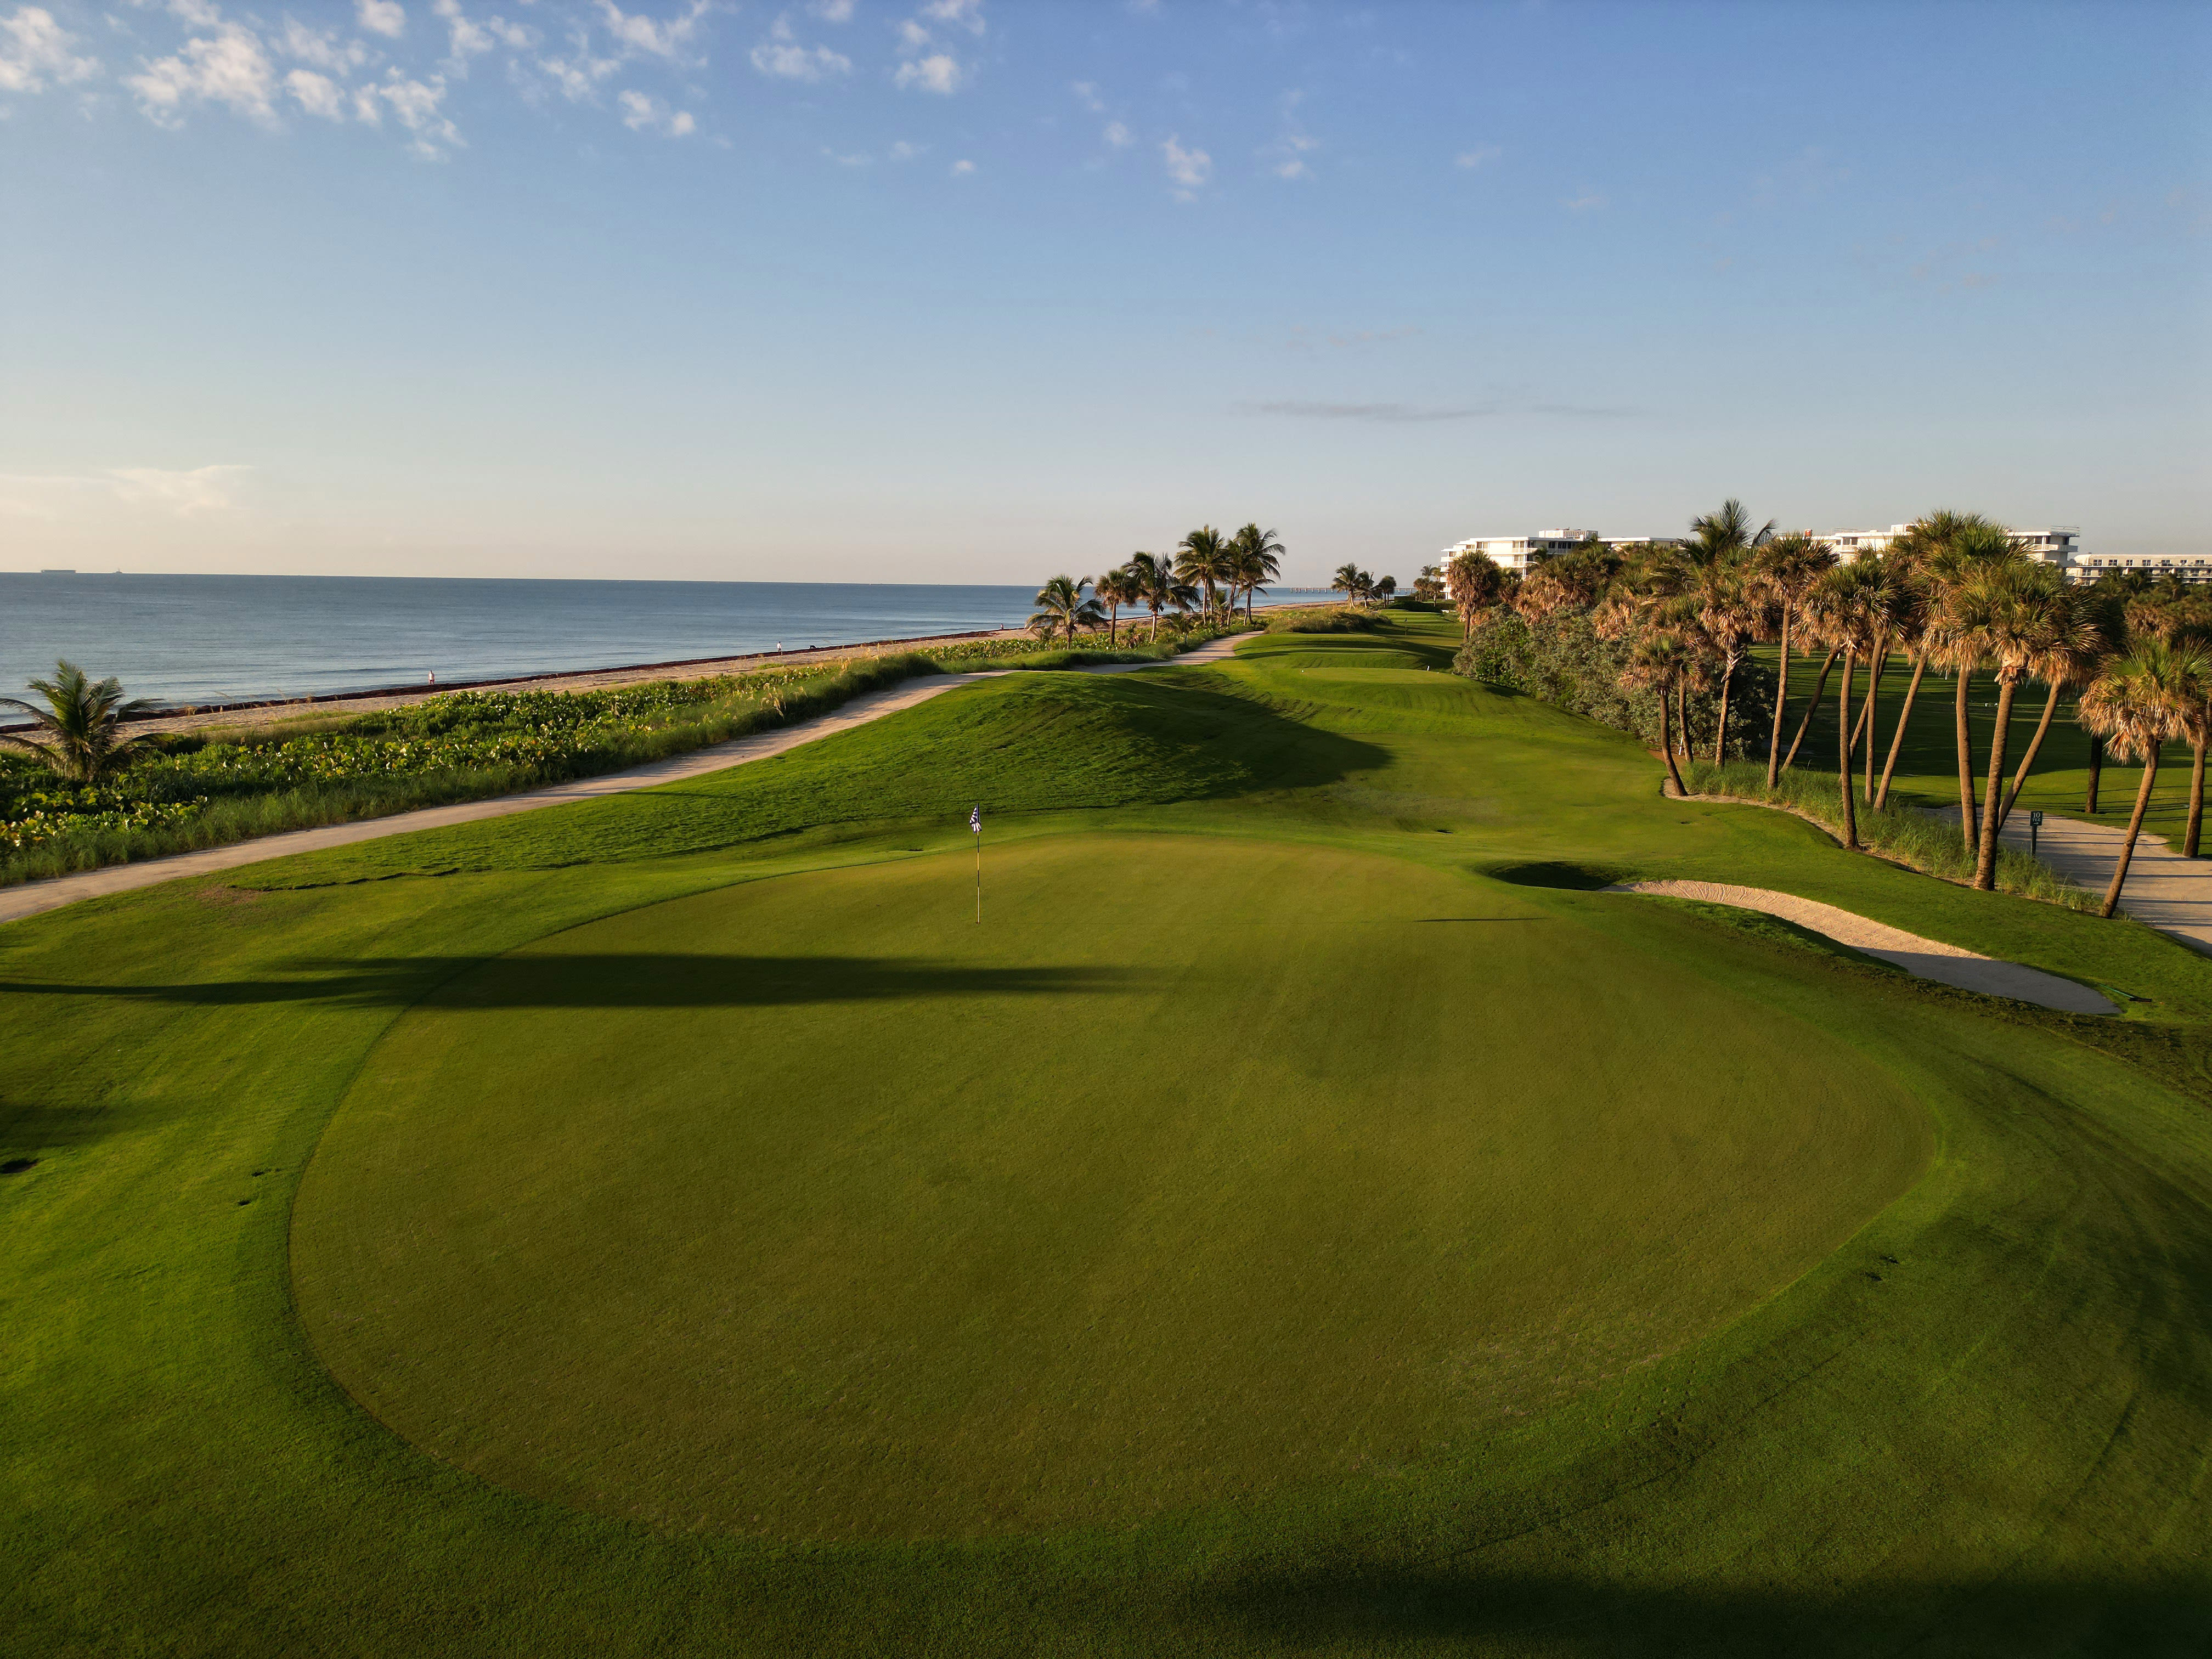 The 17th green next to the ocean. (Photo by Nicholas Media)